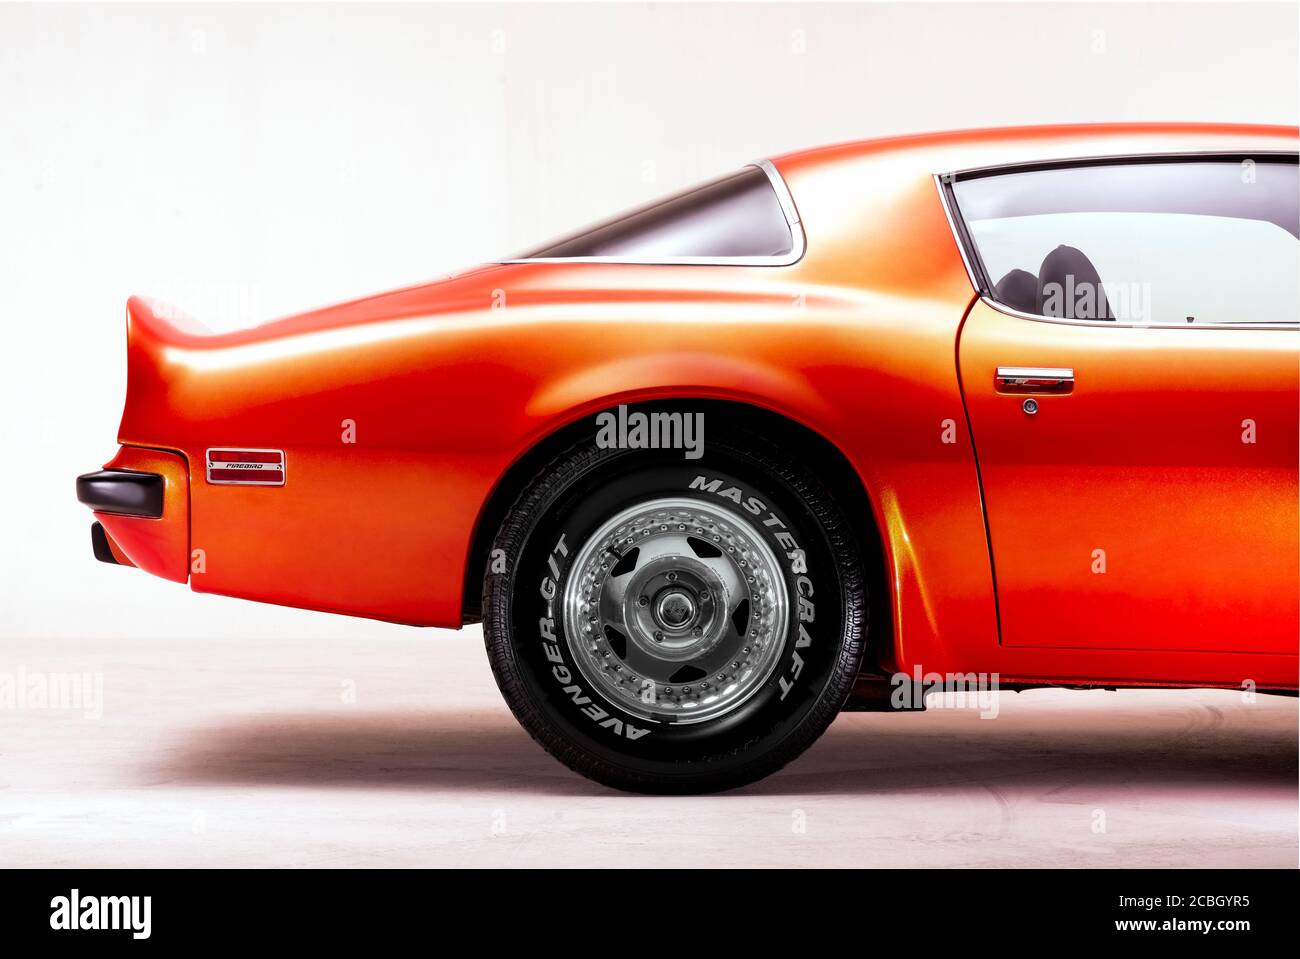 Izmir, Turkey - July 11, 2020: Close up shot of back mudguard and Side back view of a 1974 Pontiac Brand Trans am firebird in a studio shot. Stock Photo